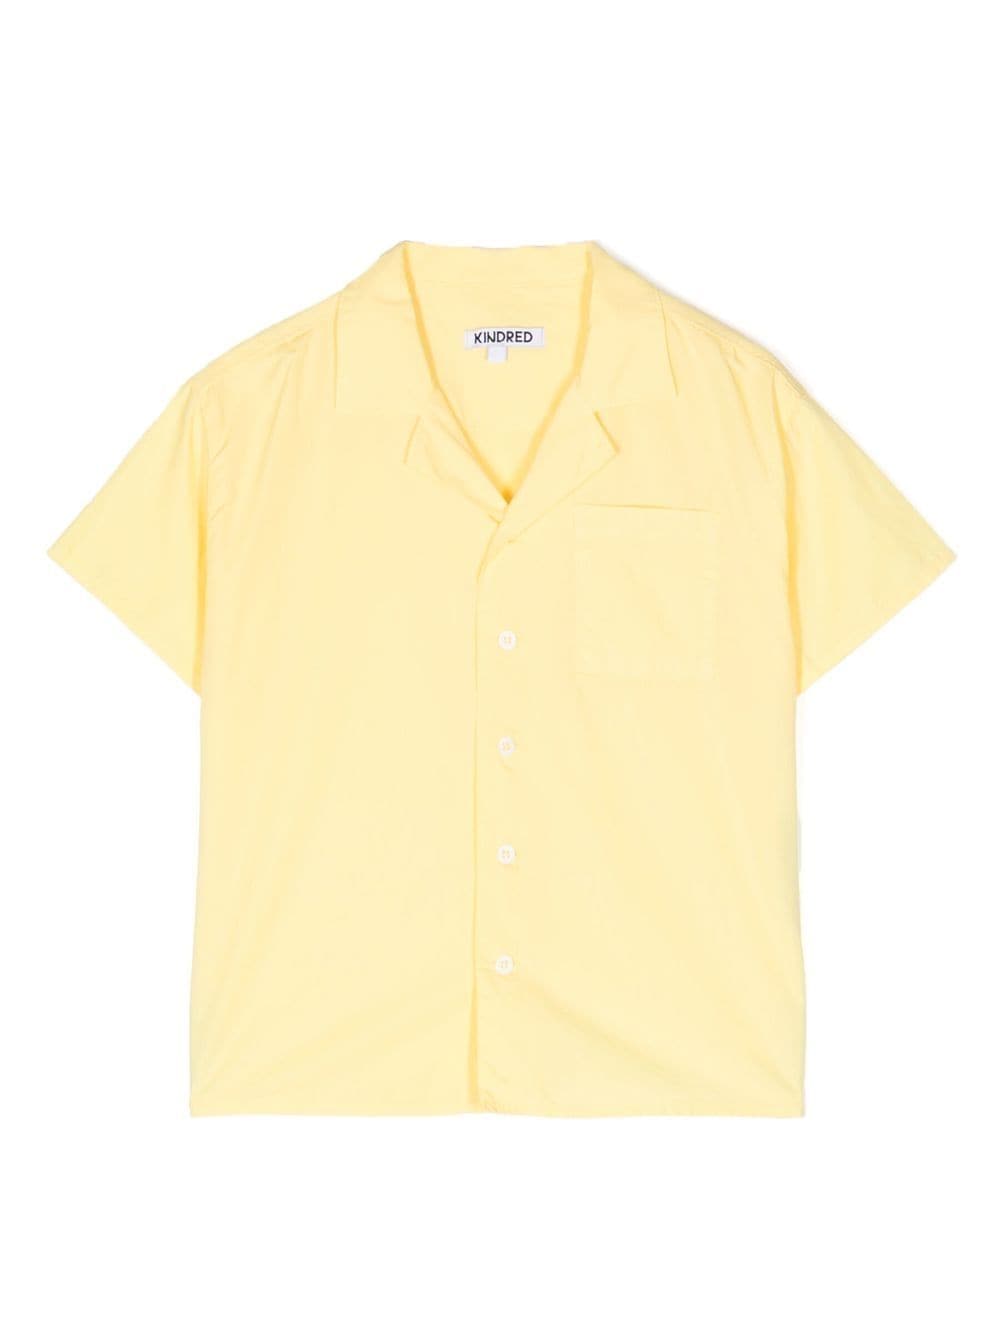 KINDRED club-collar short-sleeve shirt - Yellow von KINDRED